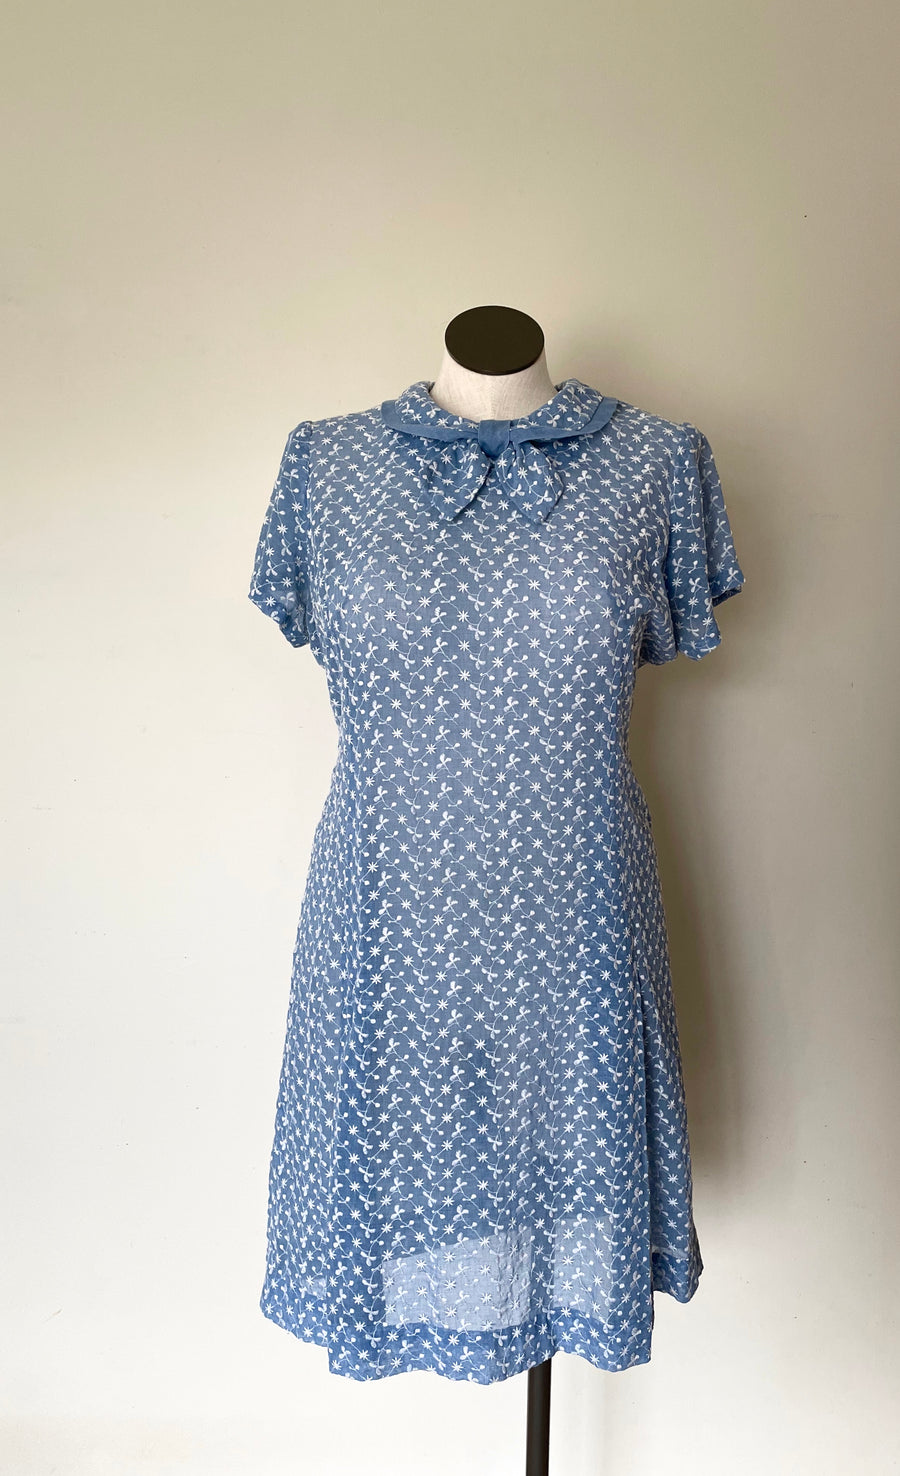 1960's Embroidered Shift Dress - Size M/L